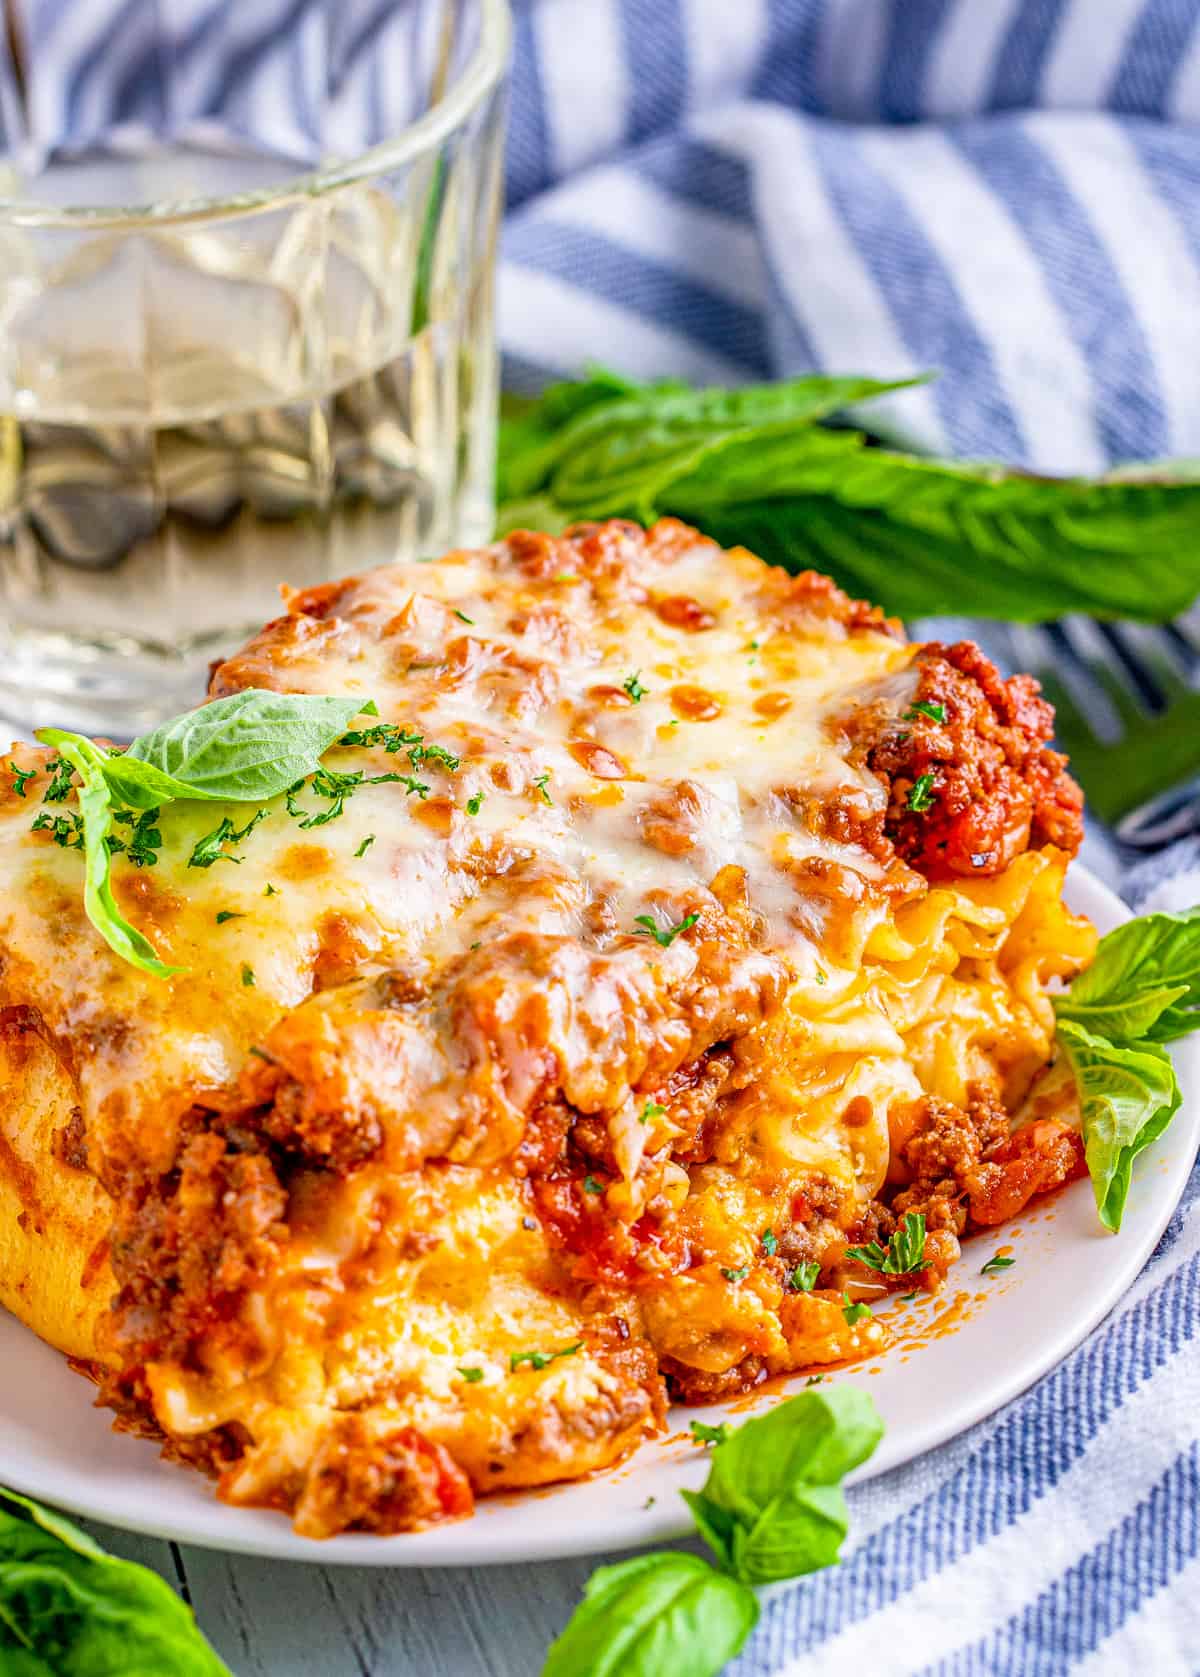 Lasagna Rolls on white plate with basil leaves and glass of water in background.